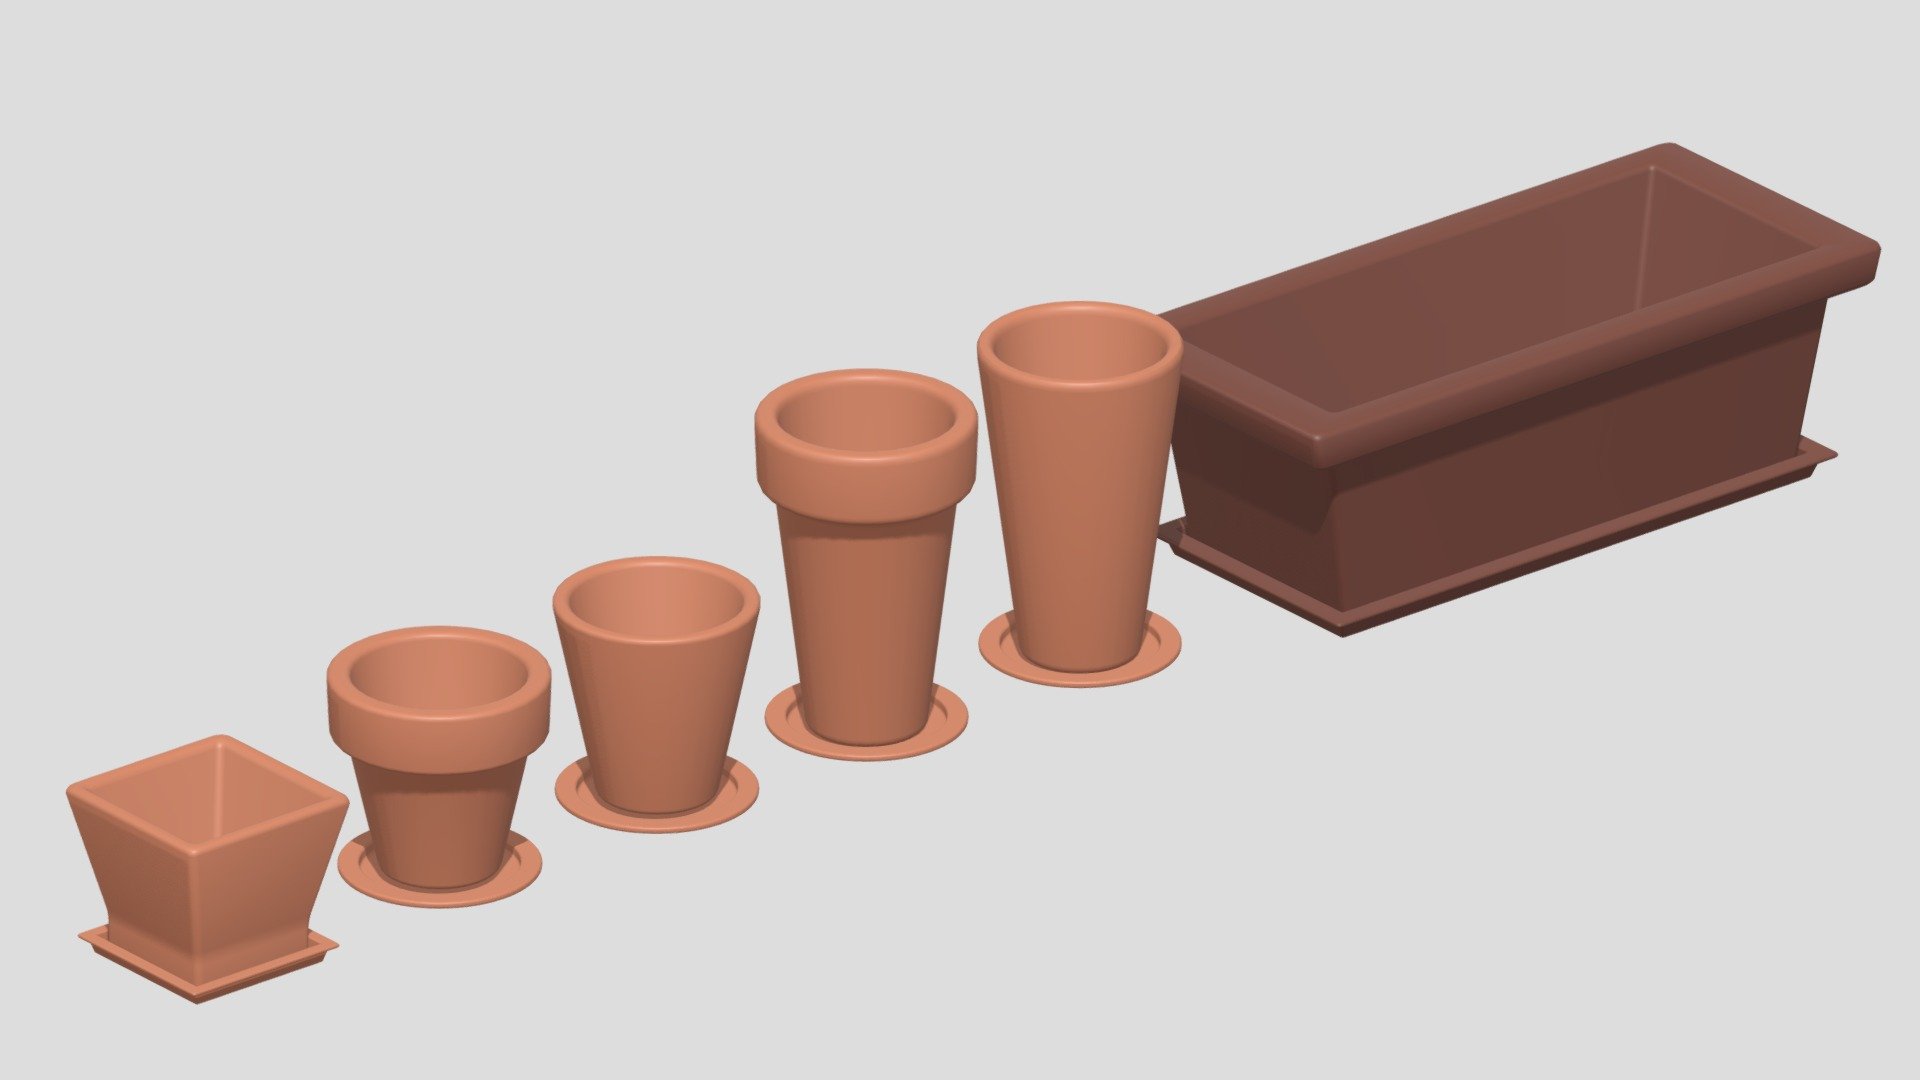 -Cartoon Flower Pot Collection.

-This product contains 12 objects.

-Vert: 13,180 poly: 12,804.

-Objects and materials have the correct names.

-This product was created in Blender 2.935.

-Formats: blend, fbx, obj, c4d, dae, abc, stl, u4d glb, unity.

-We hope you enjoy this model.

-Thank you 3d model